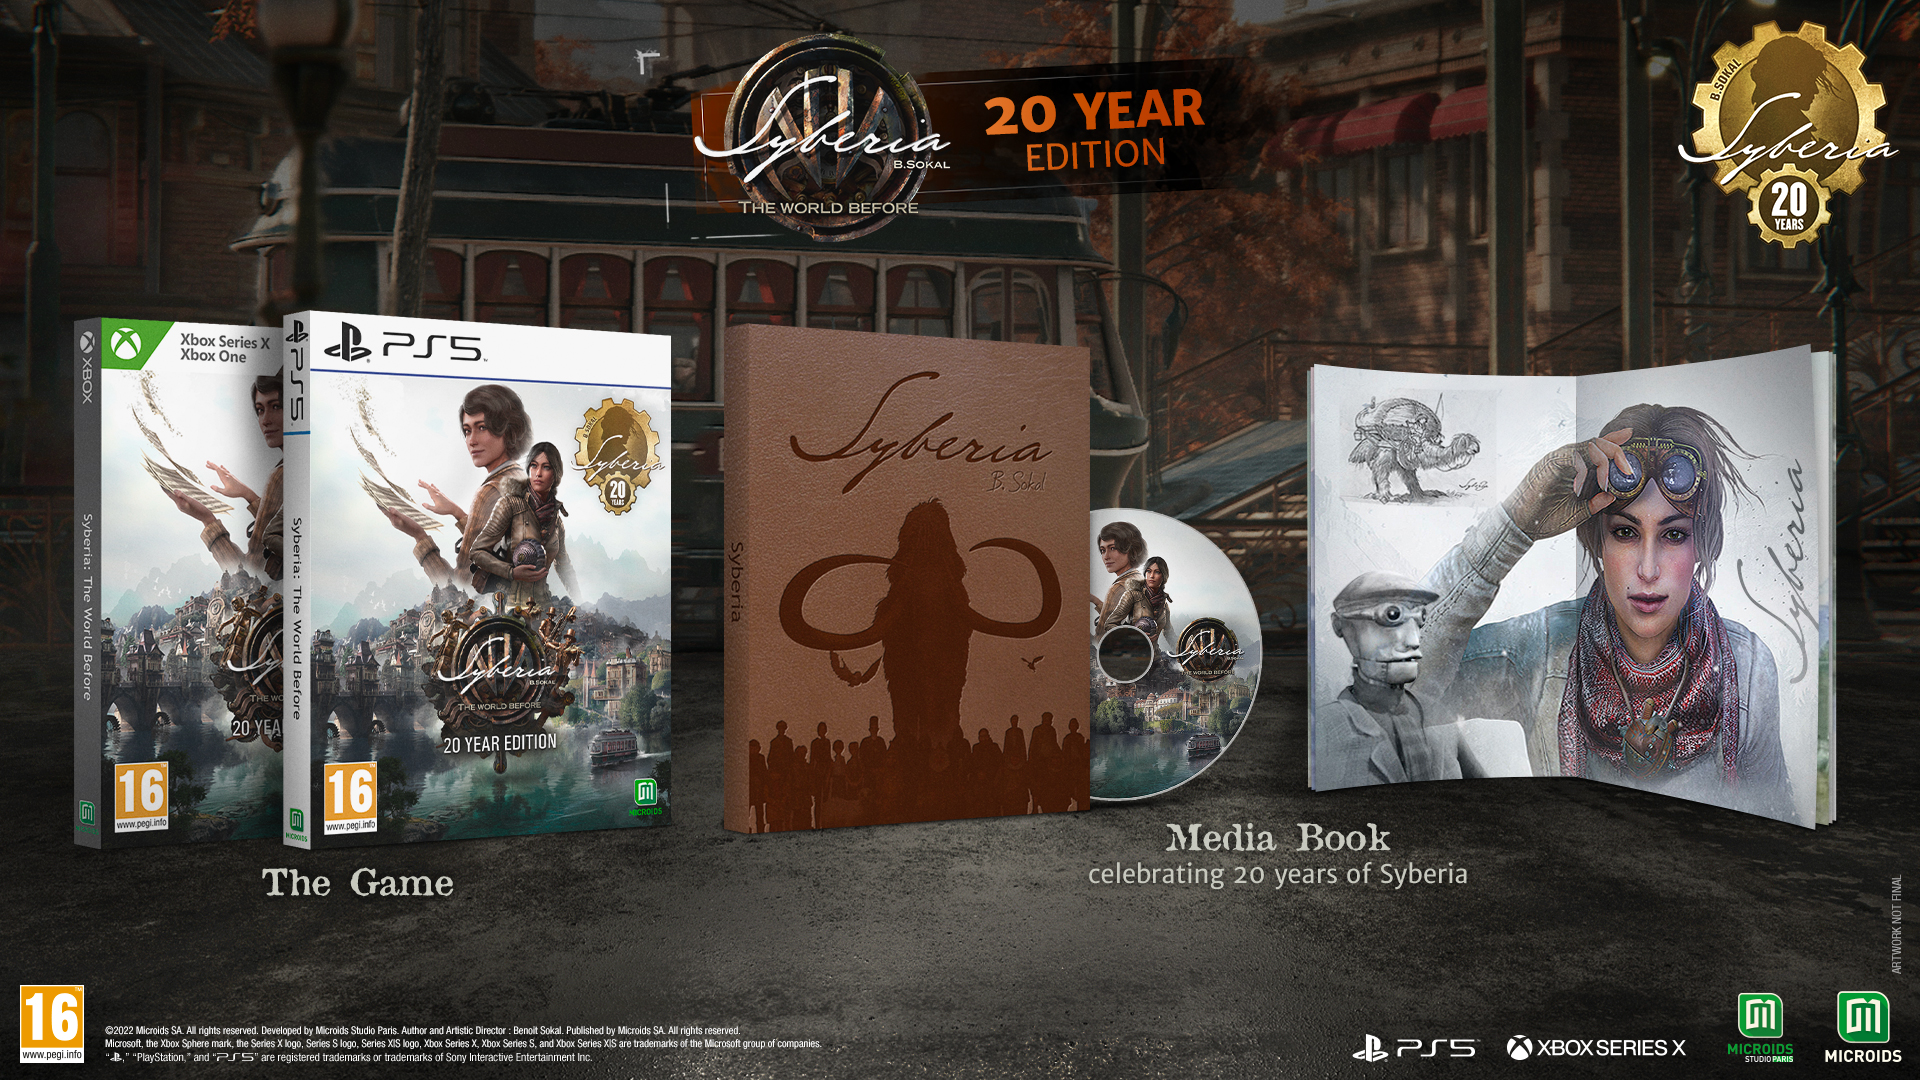 Syberia: The World Before 20 year edition 